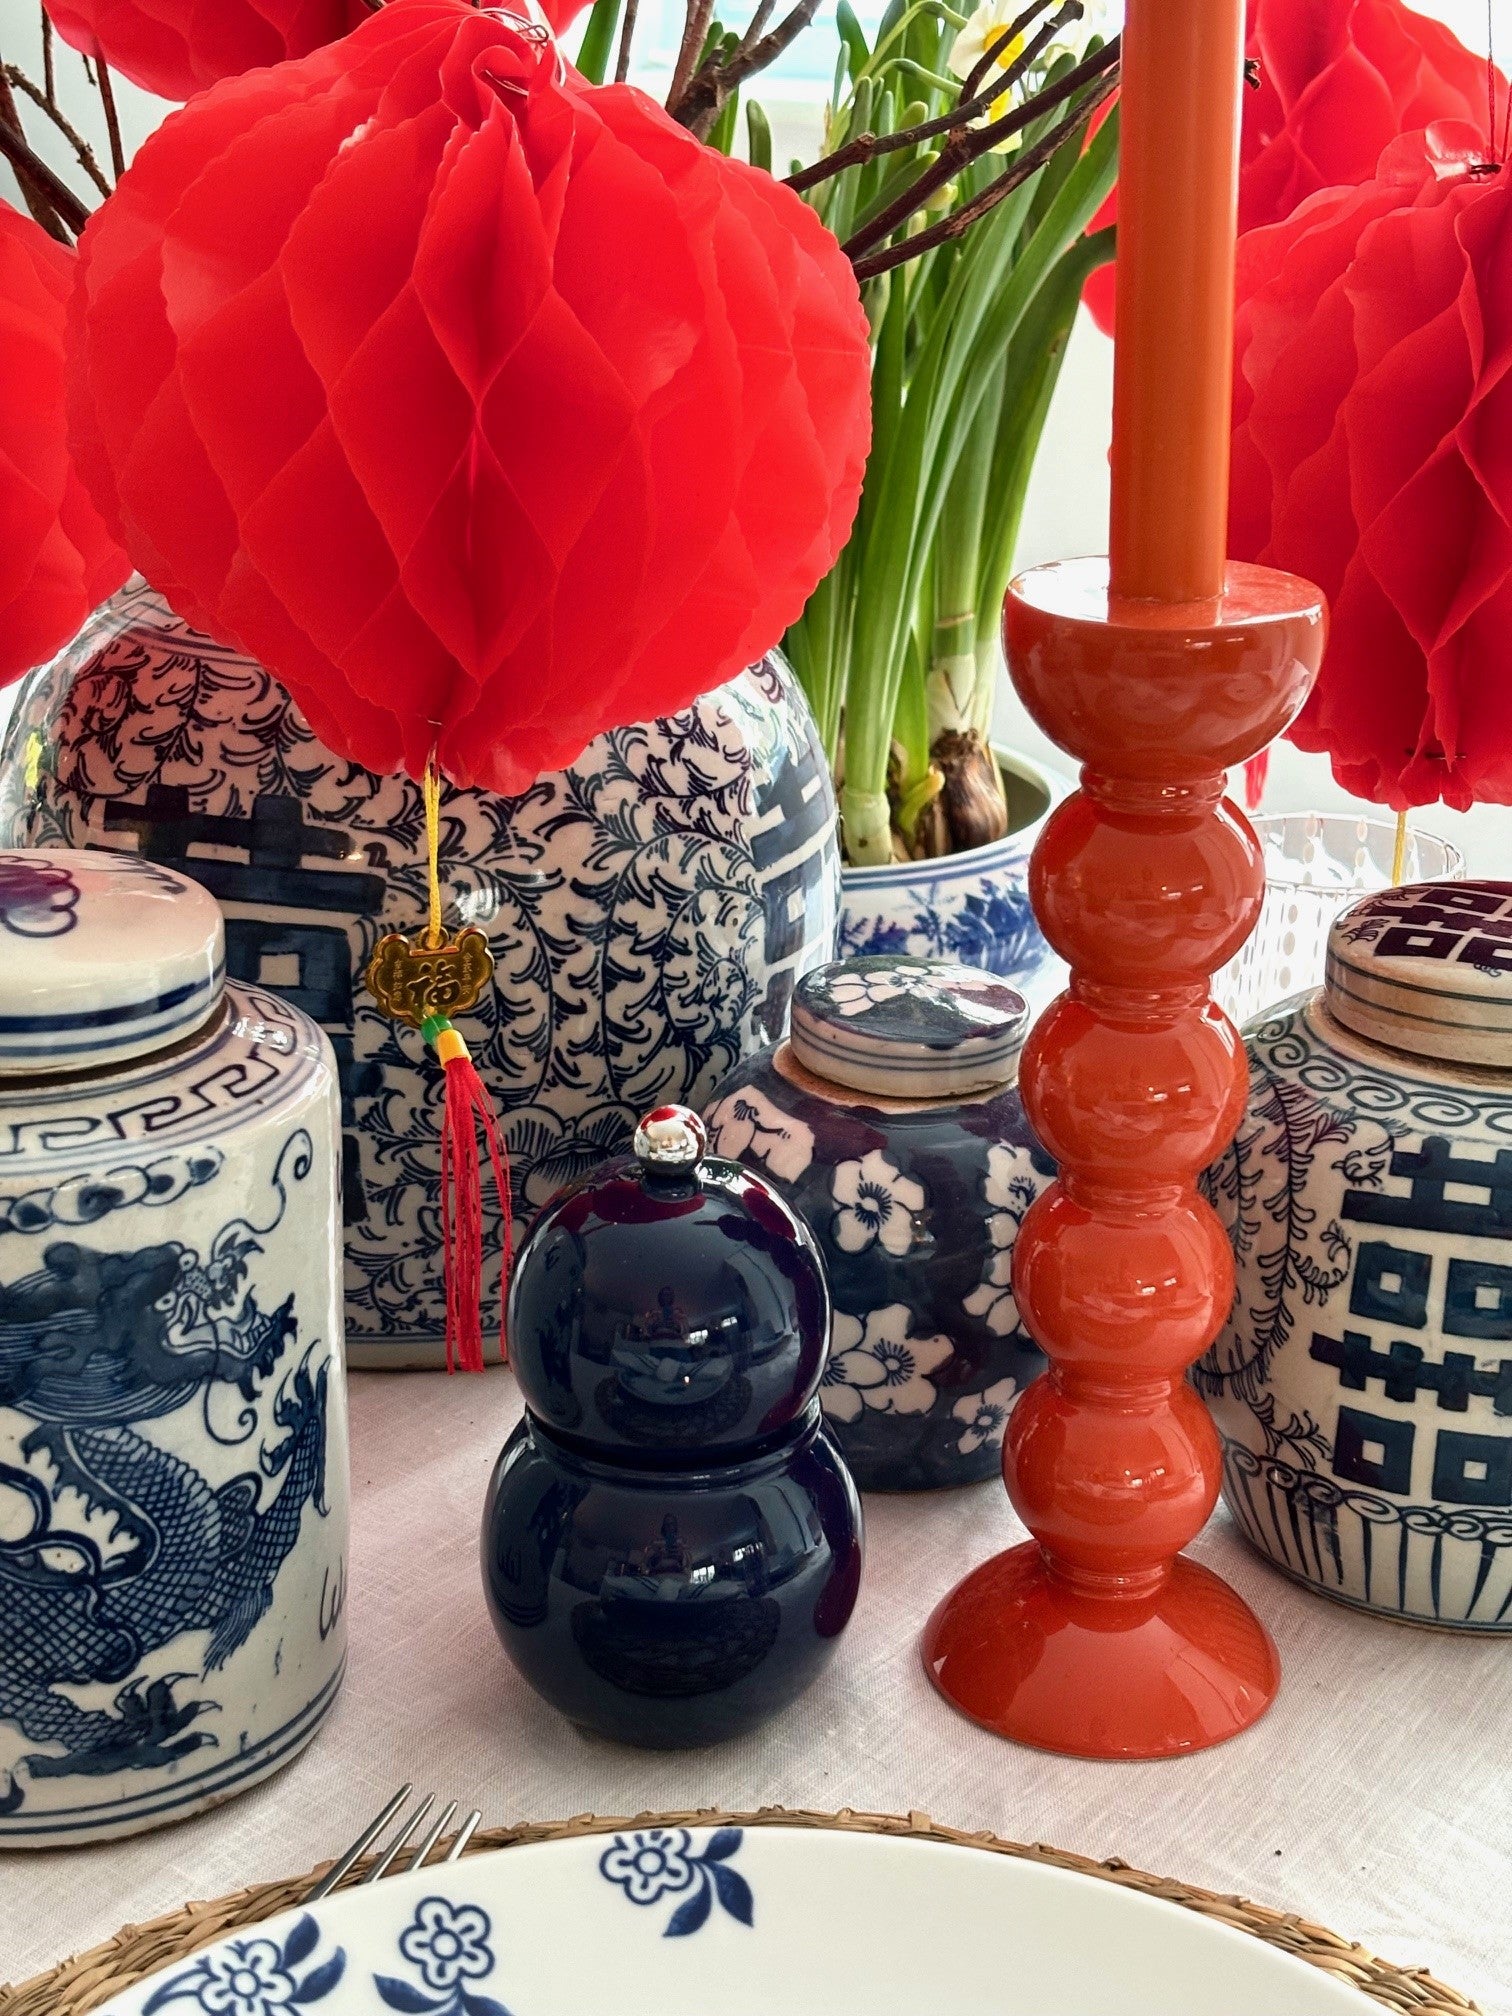 An orange bobbin candlestick on a table surrounded by blue and white ginger jars and red lanterns.